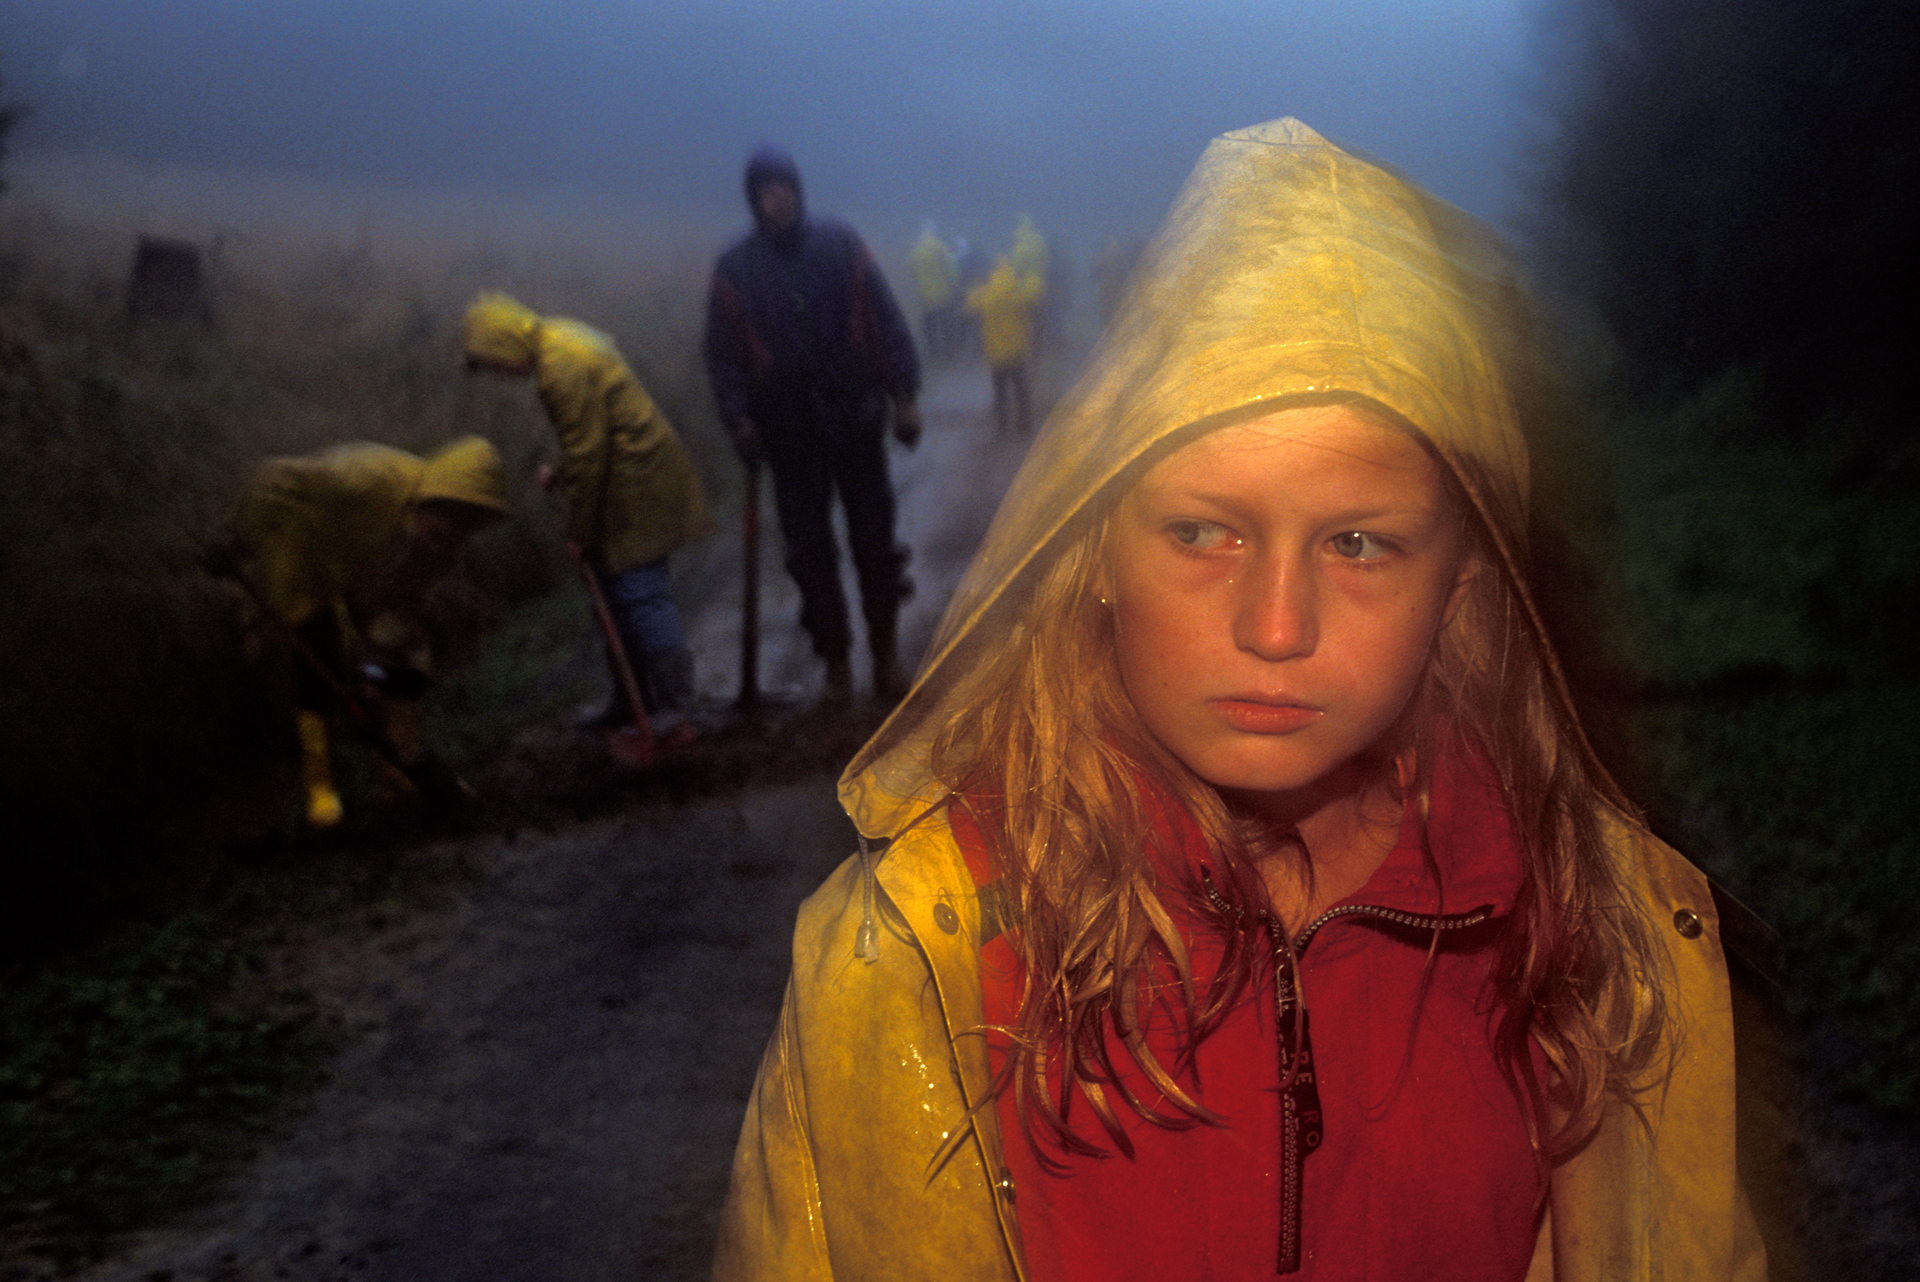  A child pauses resentfully while working in a rainy forest.  Hoher Meisner Mountain, Germany  